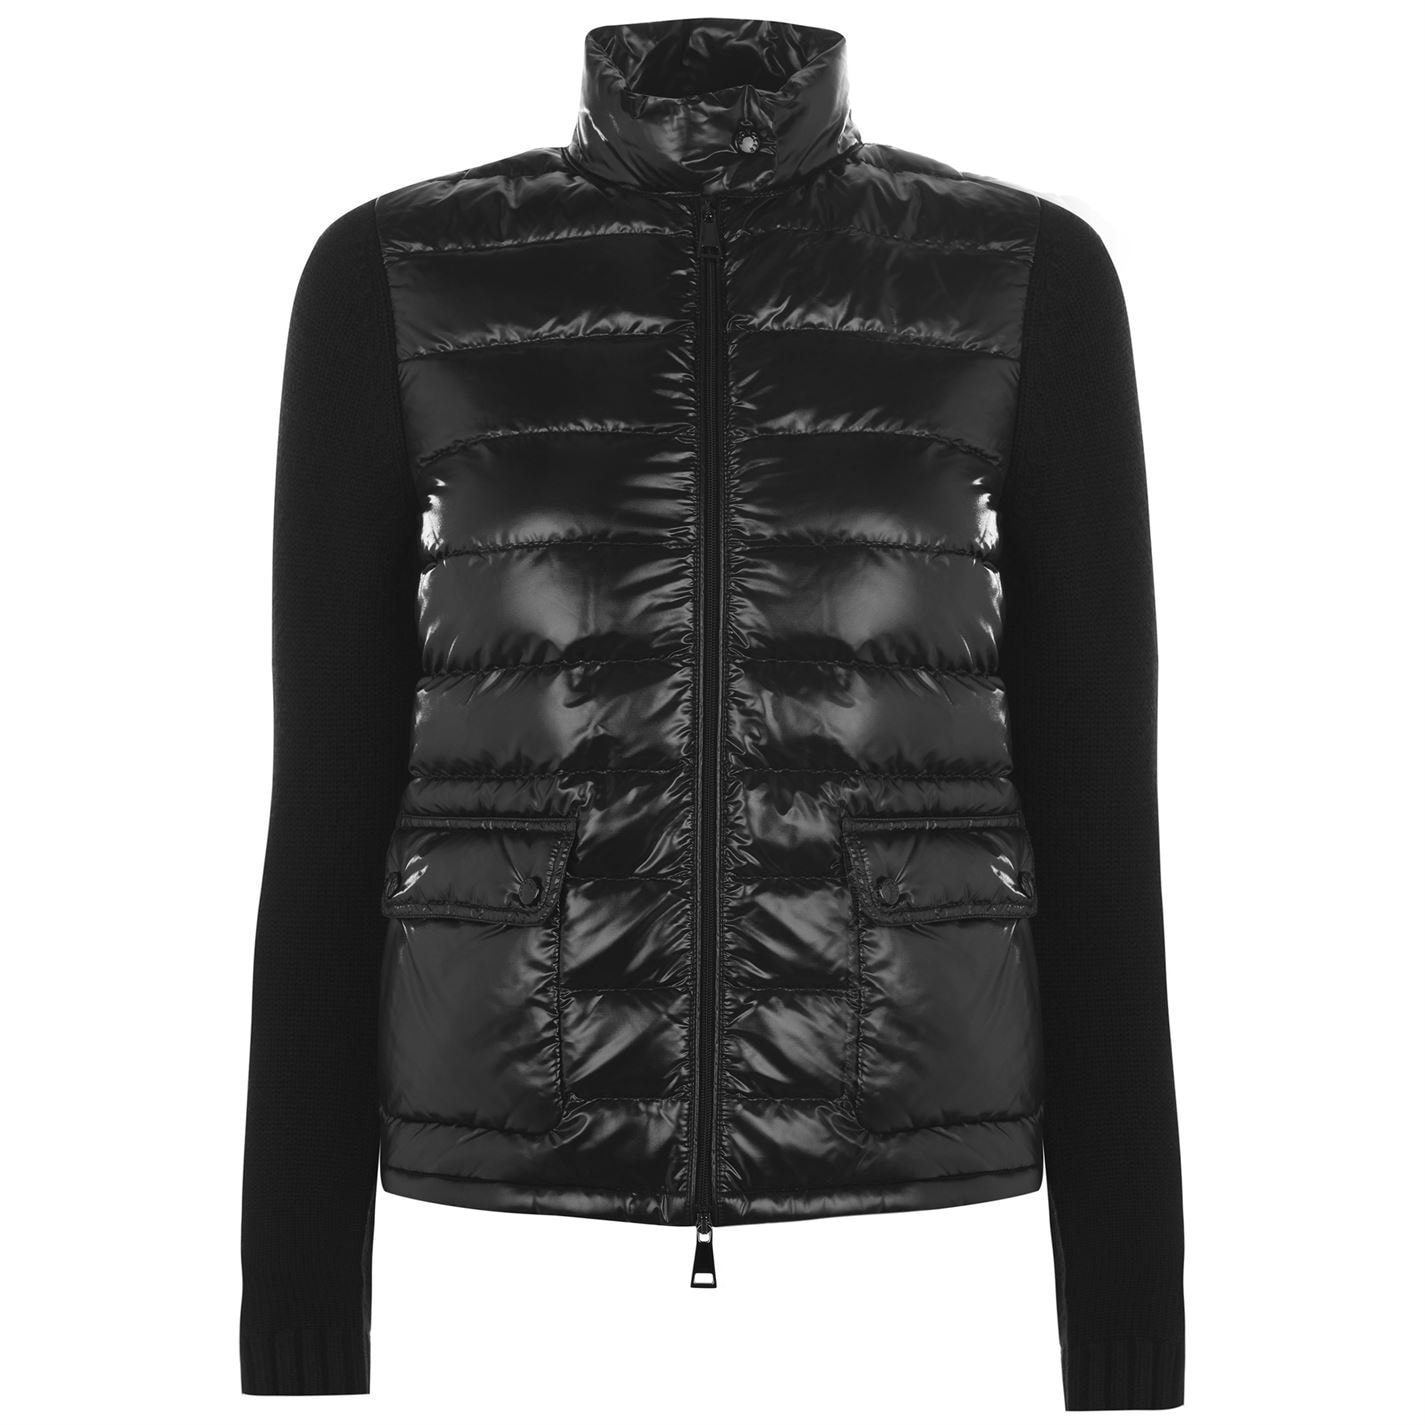 moncler Padded Tricot Jacket BLACK – high quality cheap moncler jackets